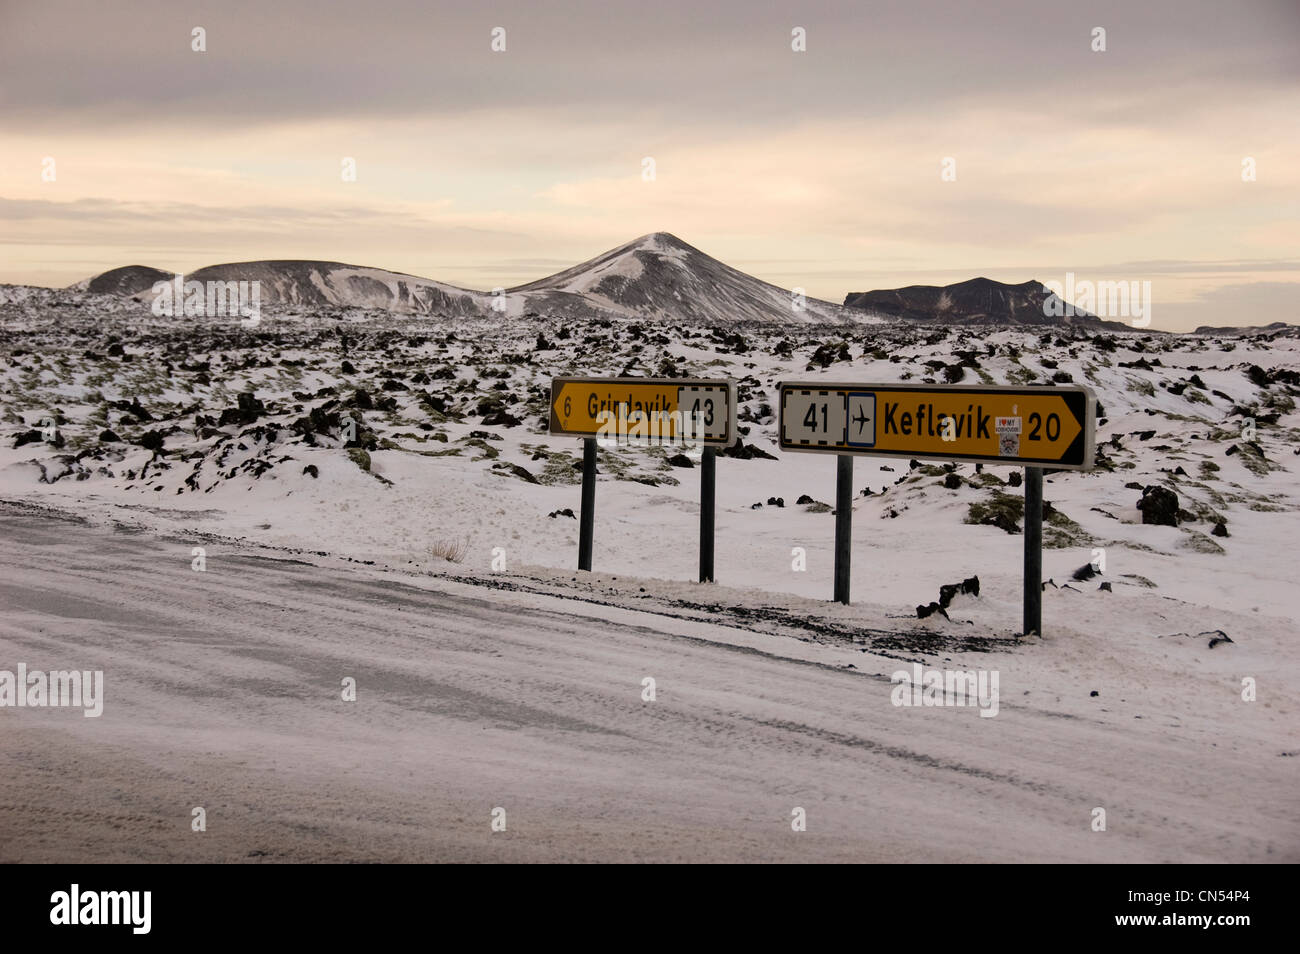 Iceland, Sudurnes Region, Grindavik, the Blue Lagoon, signboard towards Keflavik airport in the middle of snowy road Stock Photo